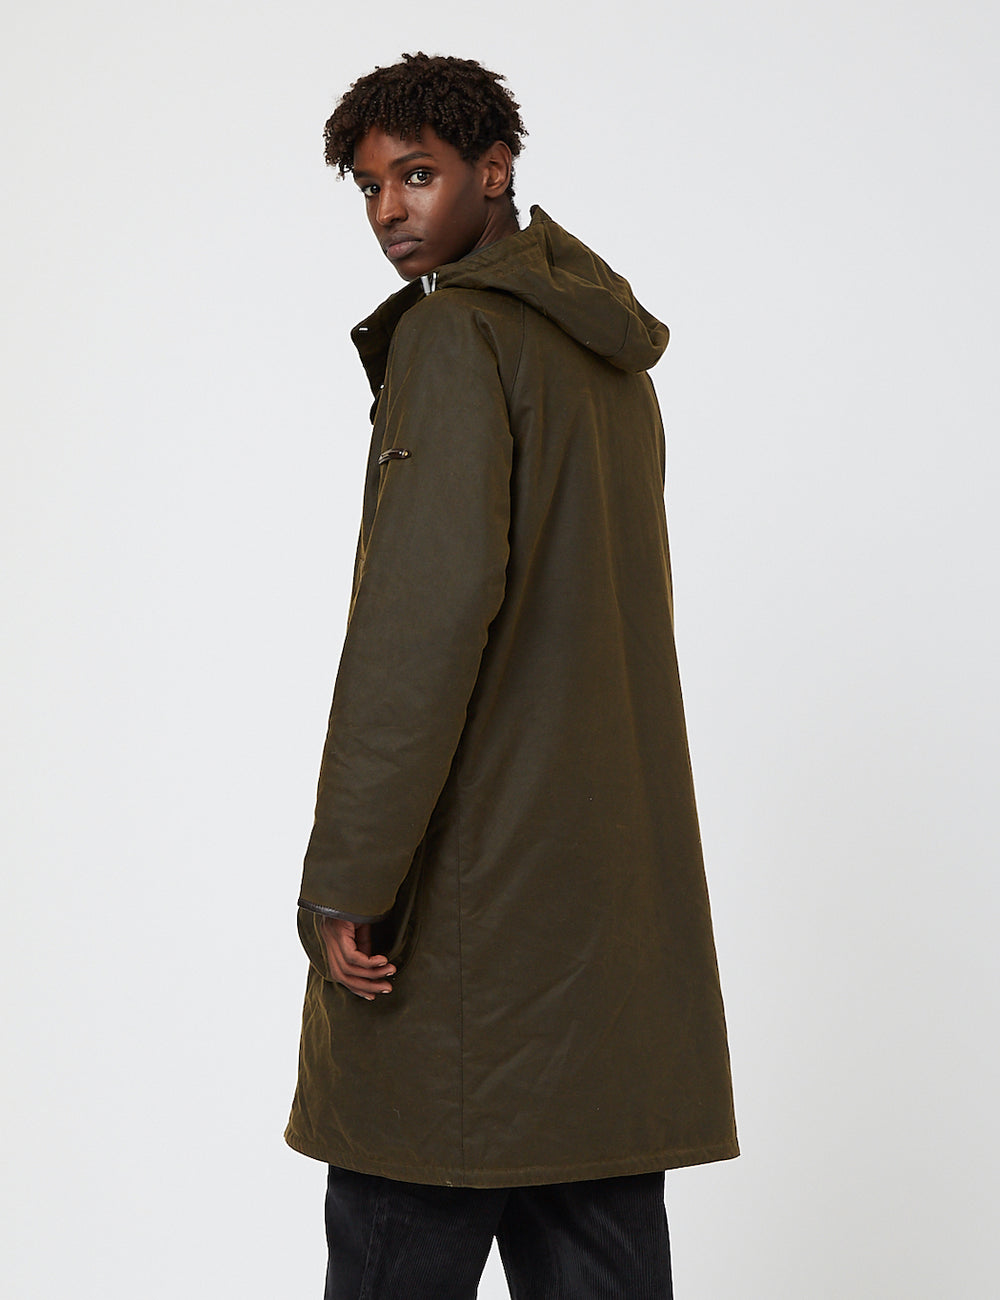 Barbour Gold Standard Supa-Hunting Jacket - Olive | URBAN EXCESS.